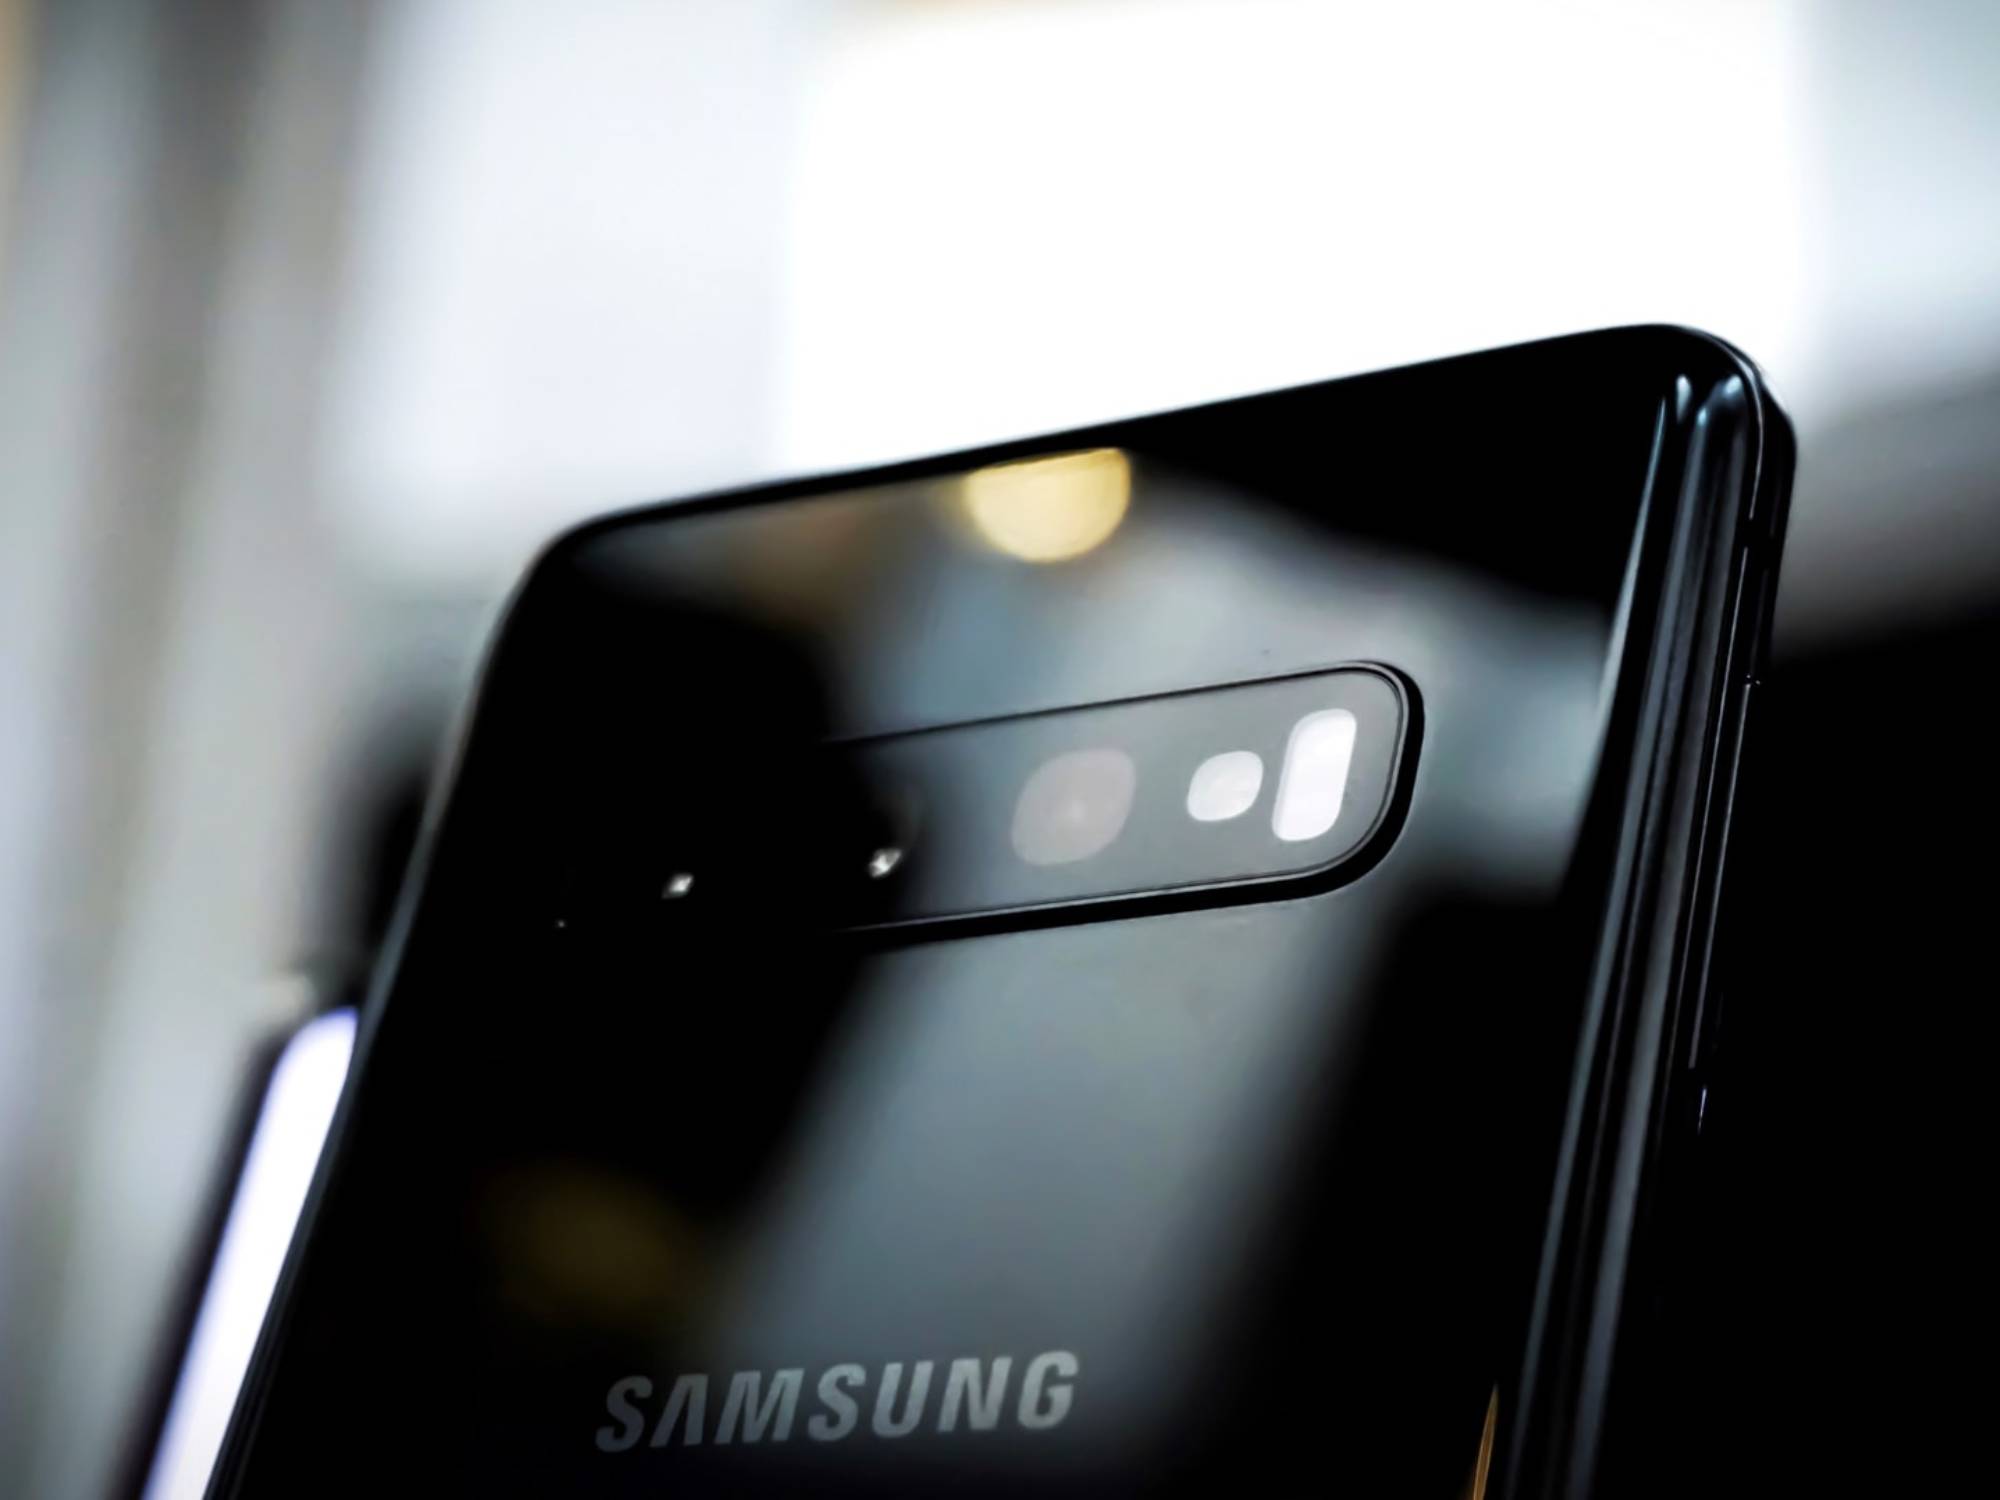 Dominate your phone with these Samsung Galaxy S10 tips and tricks